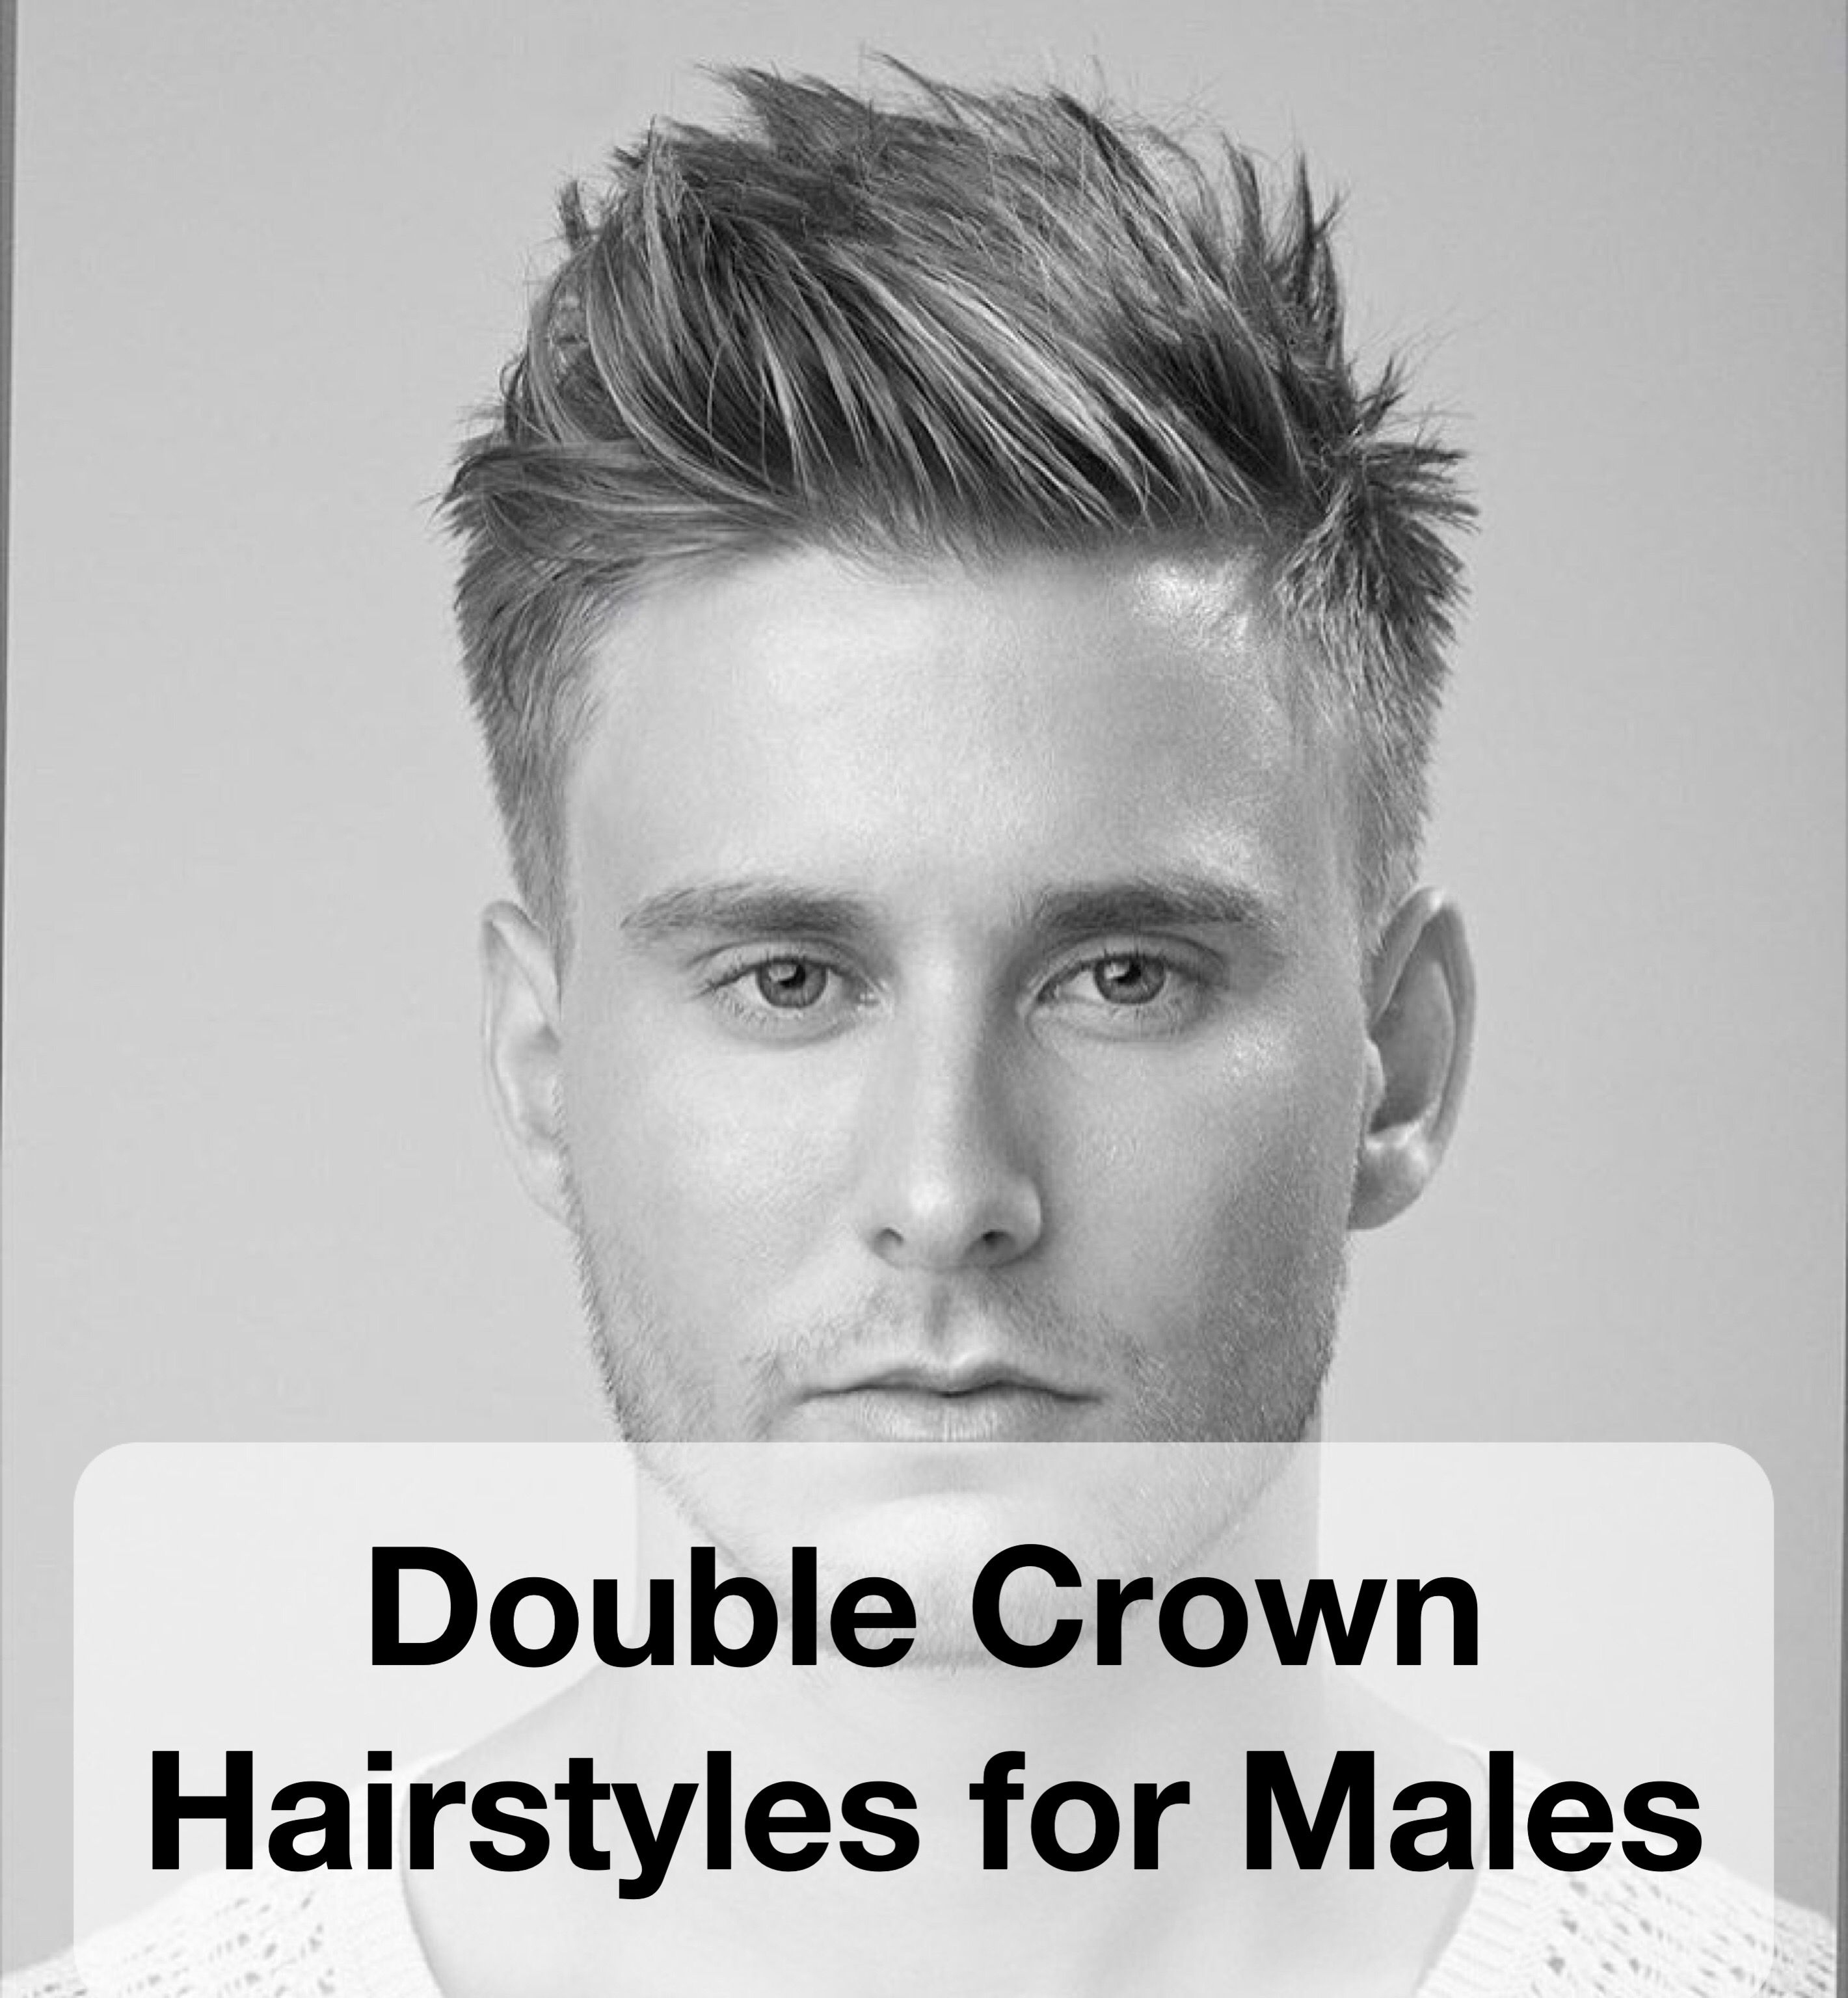 Haircuts For Men With Double Cowlick - Wavy Haircut